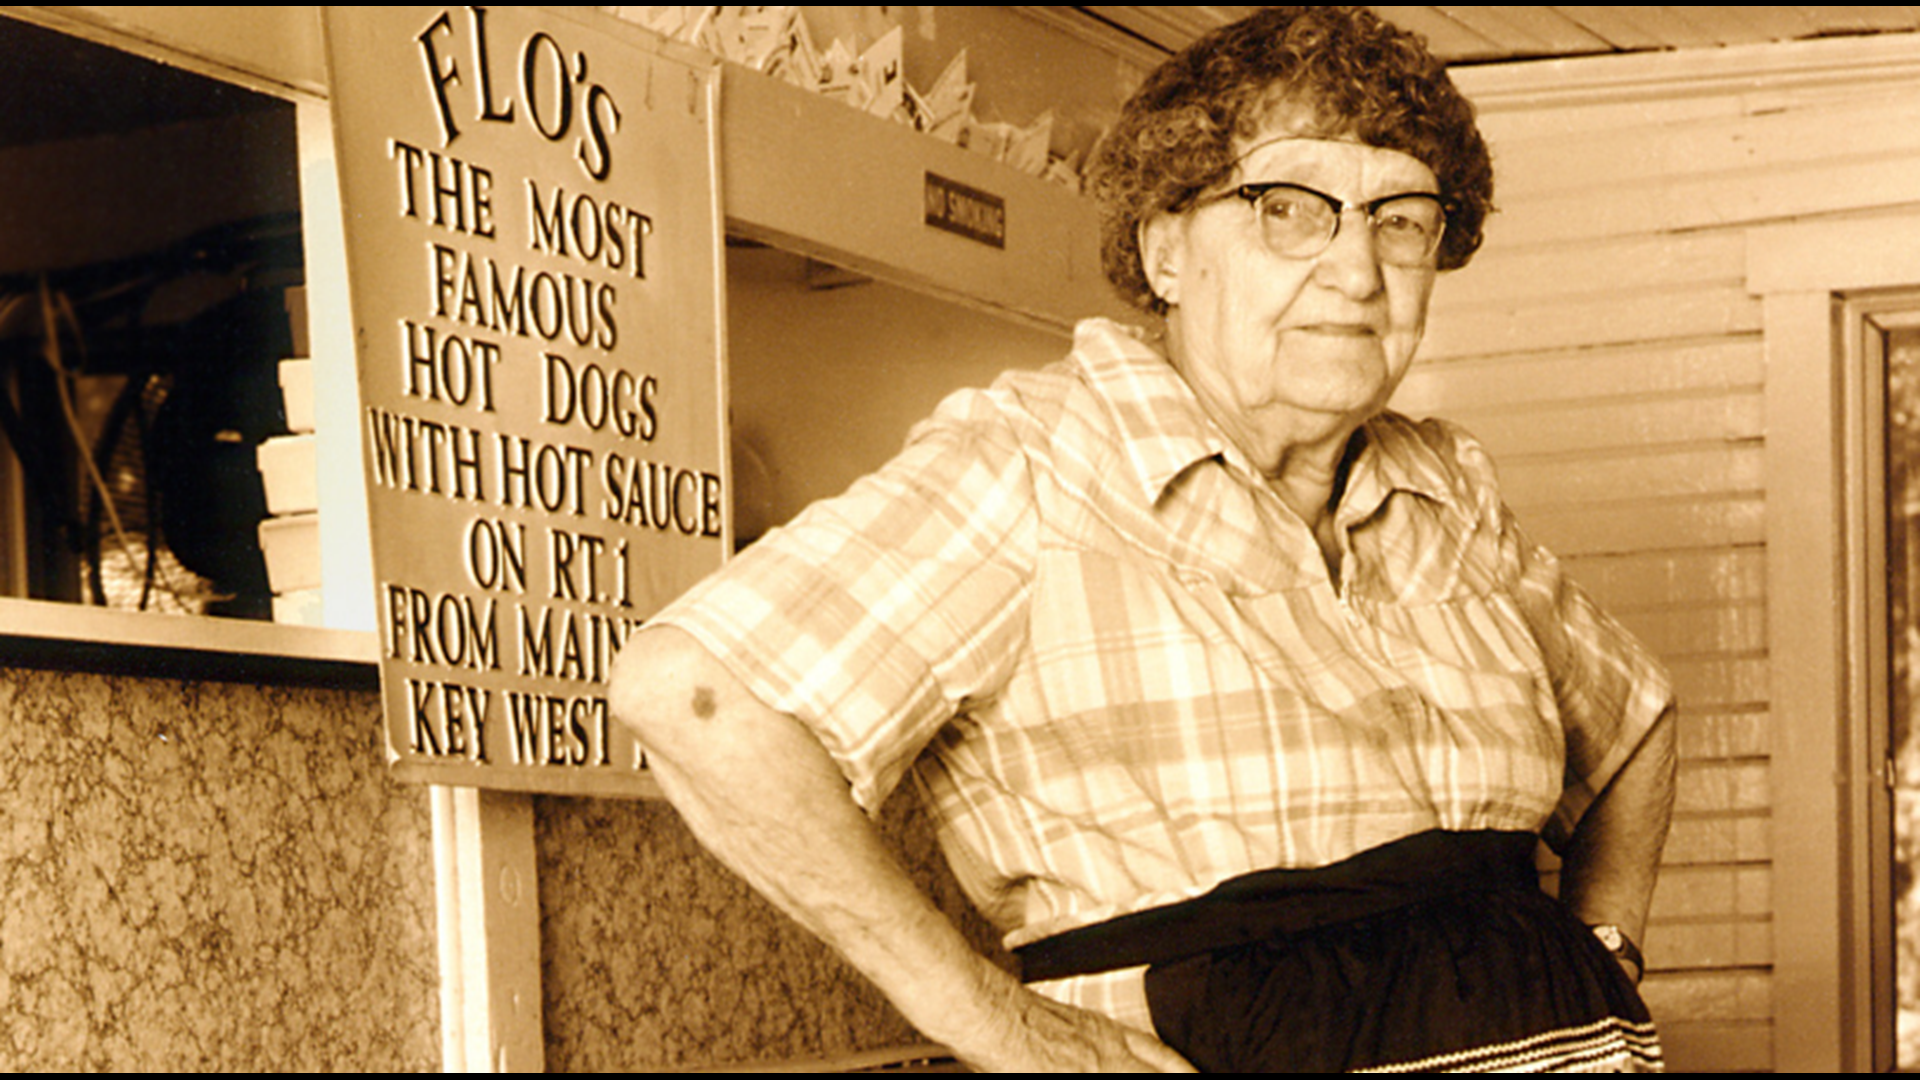 The three generations of women have been running Flo's Hot Dog stand in Cape Neddick for the last 60 years and the only thing that has changed is the price of the dogs.